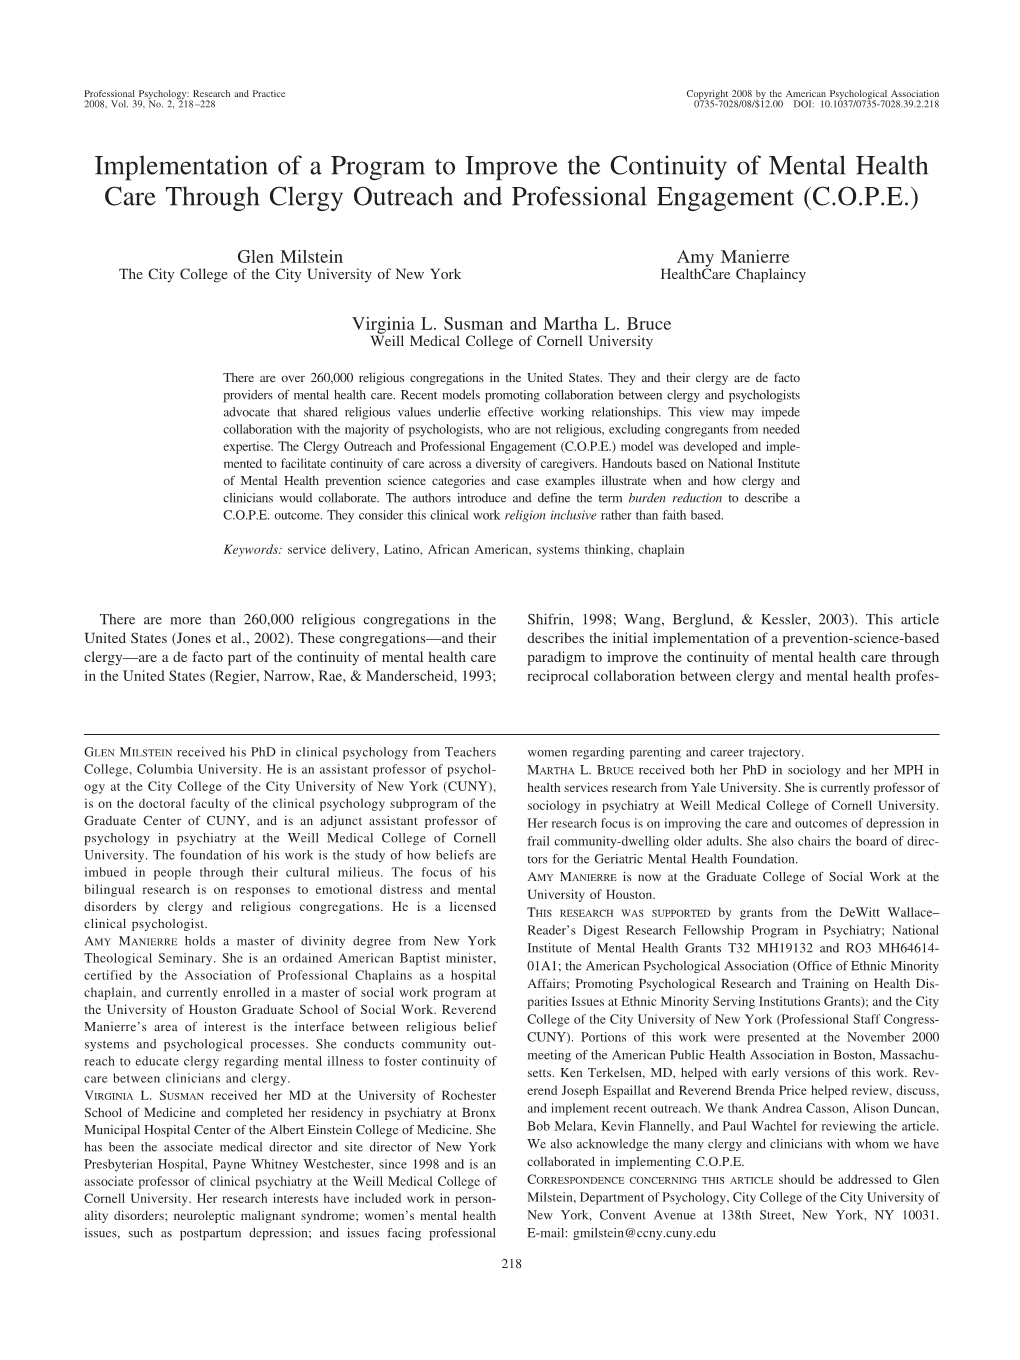 Implementation of a Program to Improve the Continuity of Mental Health Care Through Clergy Outreach and Professional Engagement (C.O.P.E.)